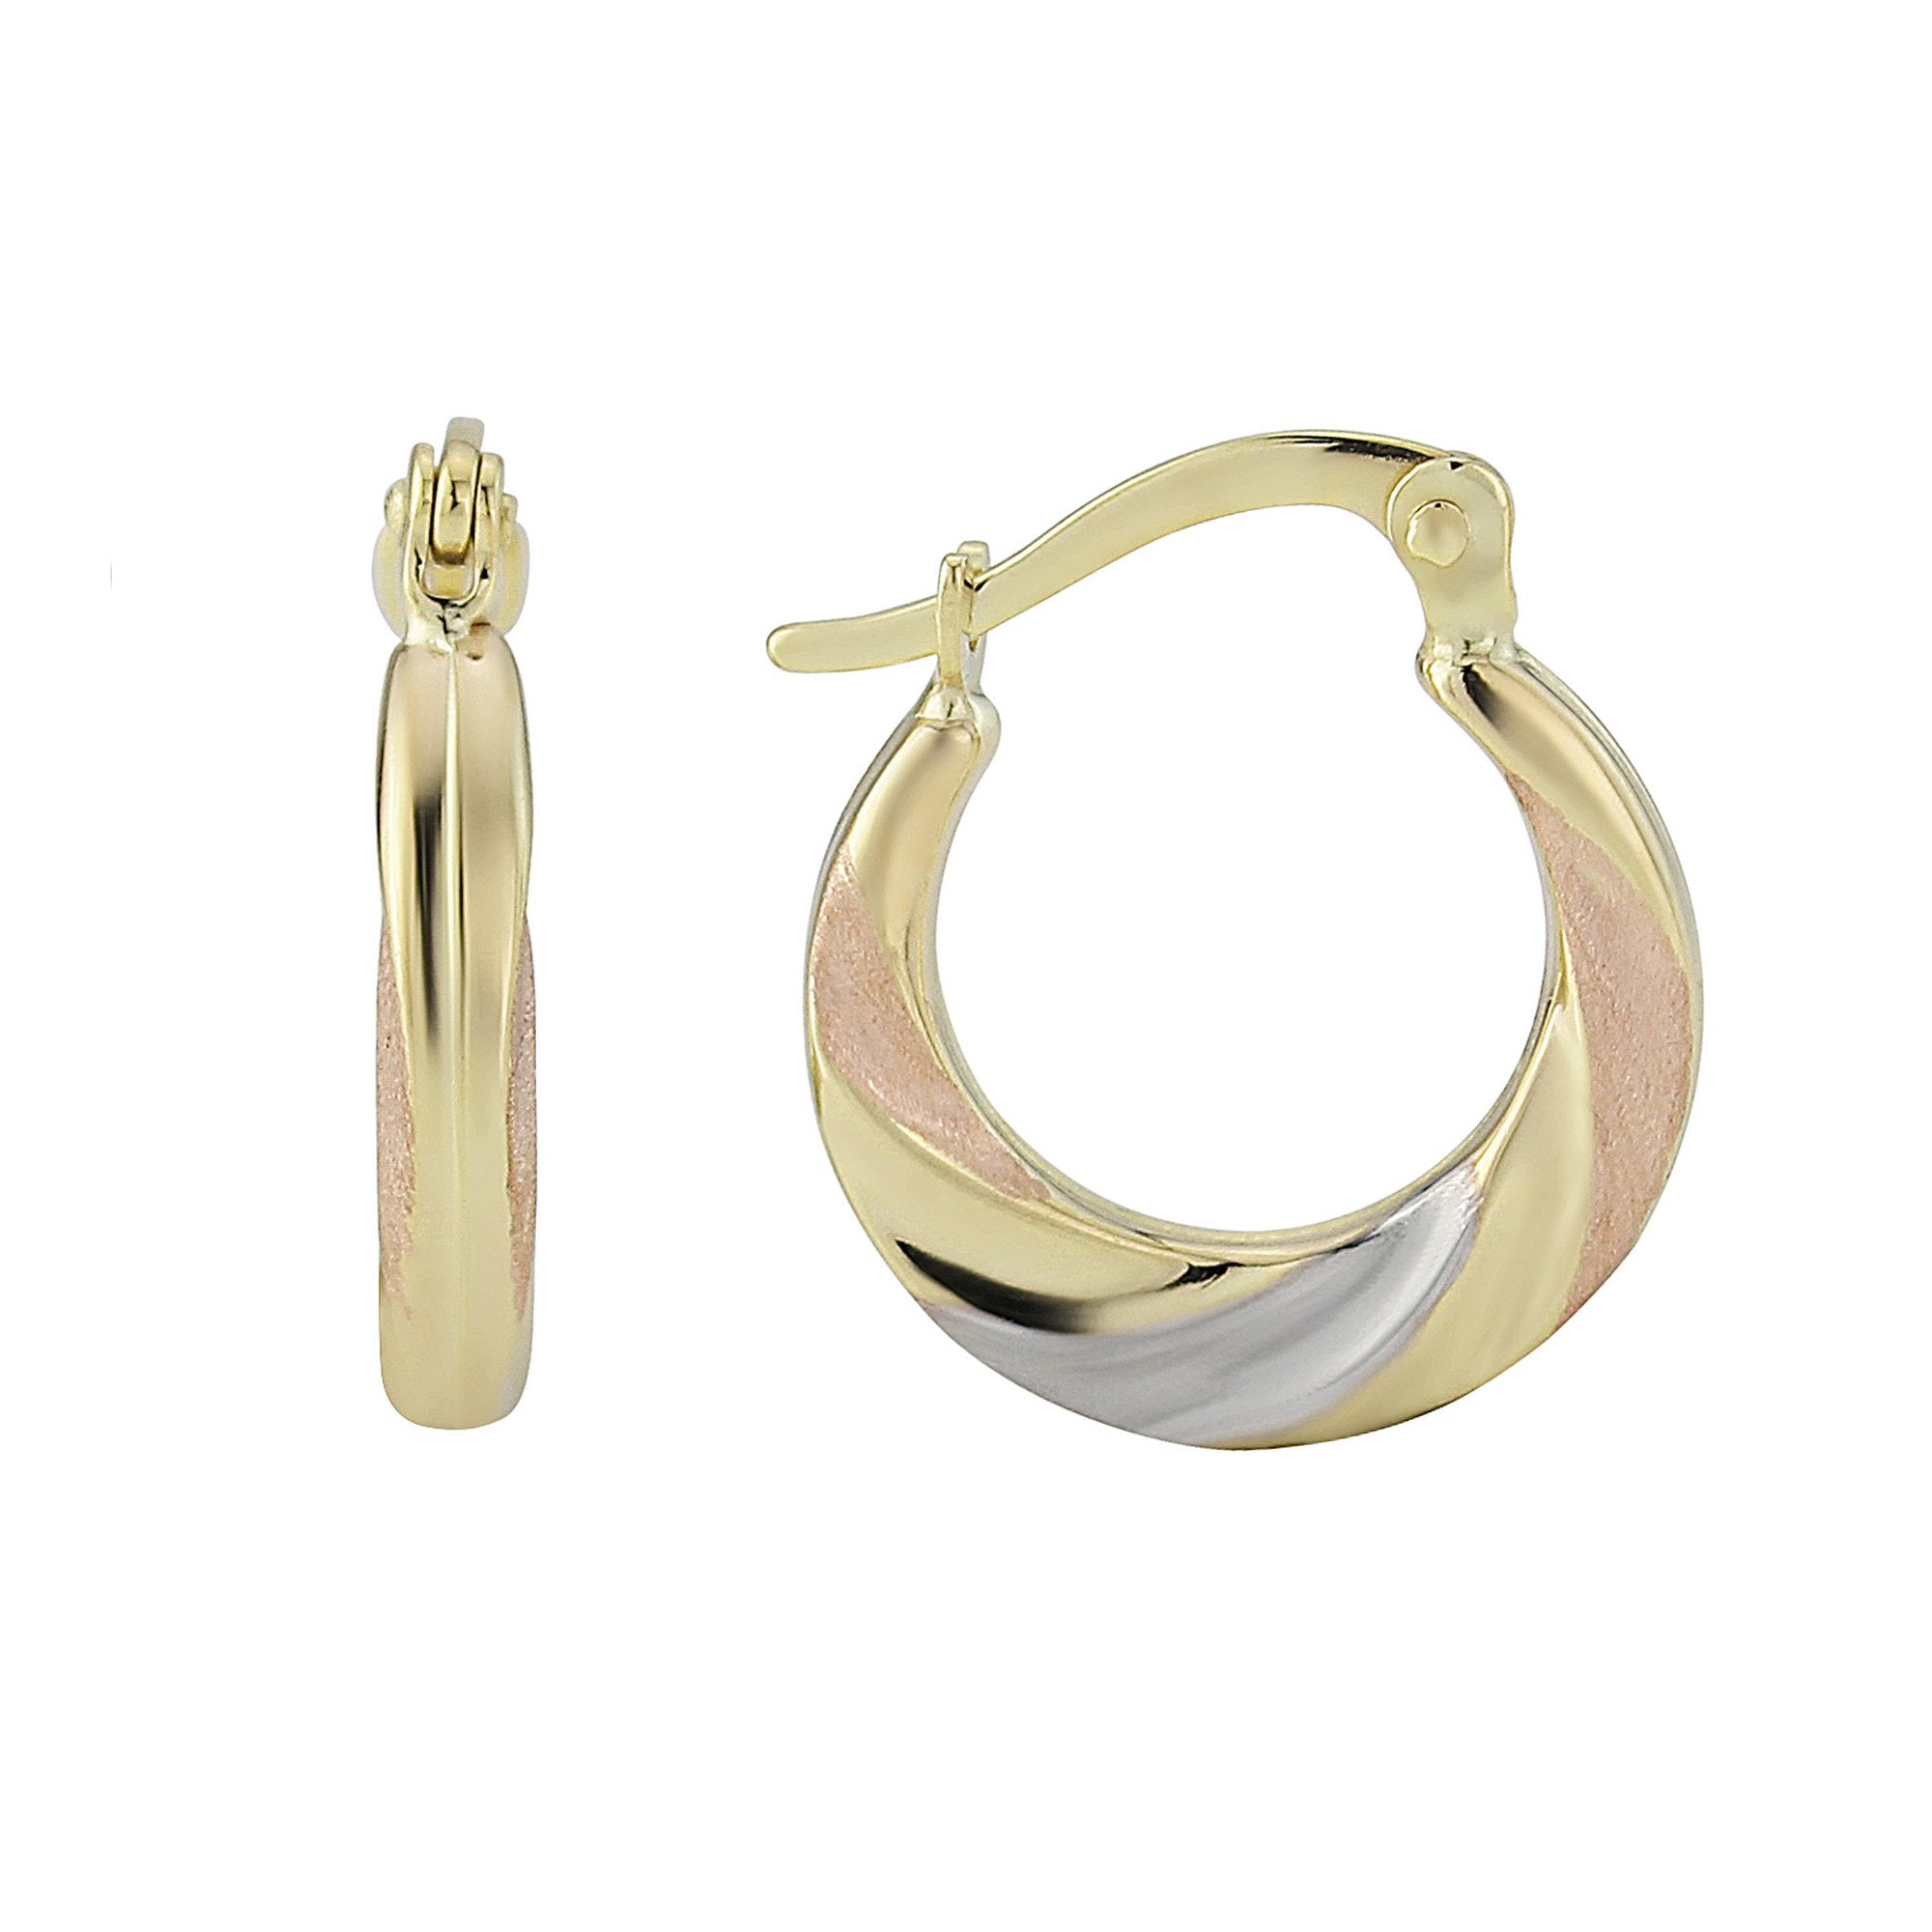 9ct gold 3 colour gold hoop earrings